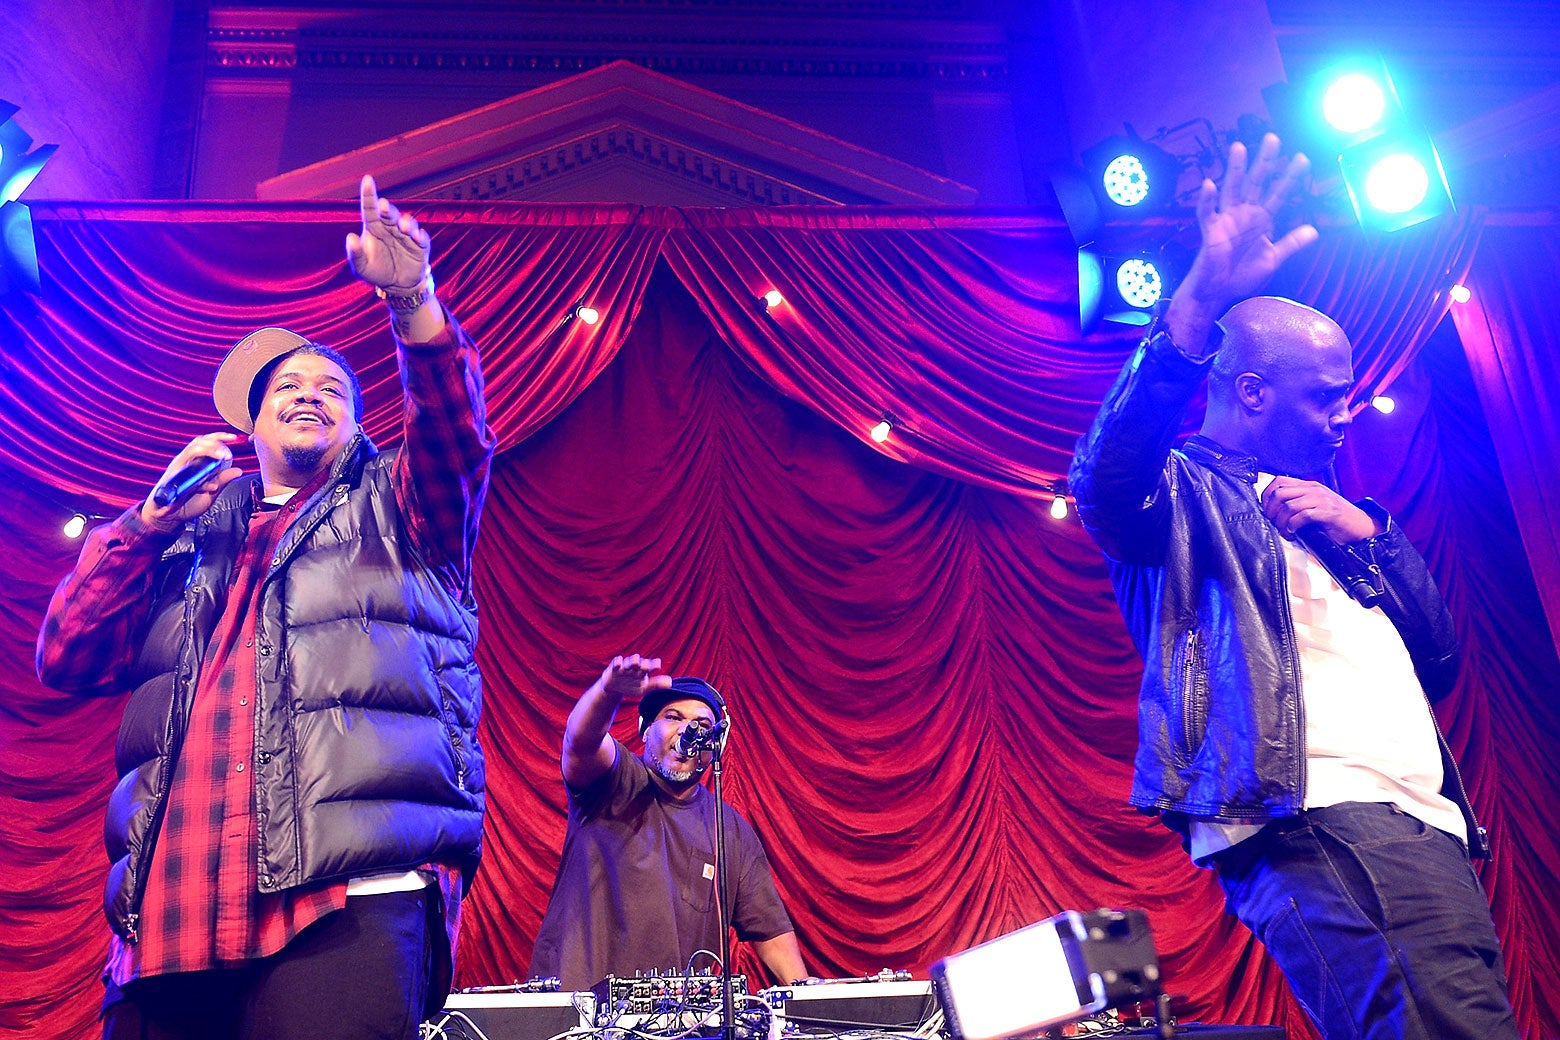 De La Soul performs a concert live on stage with their hands in the air.